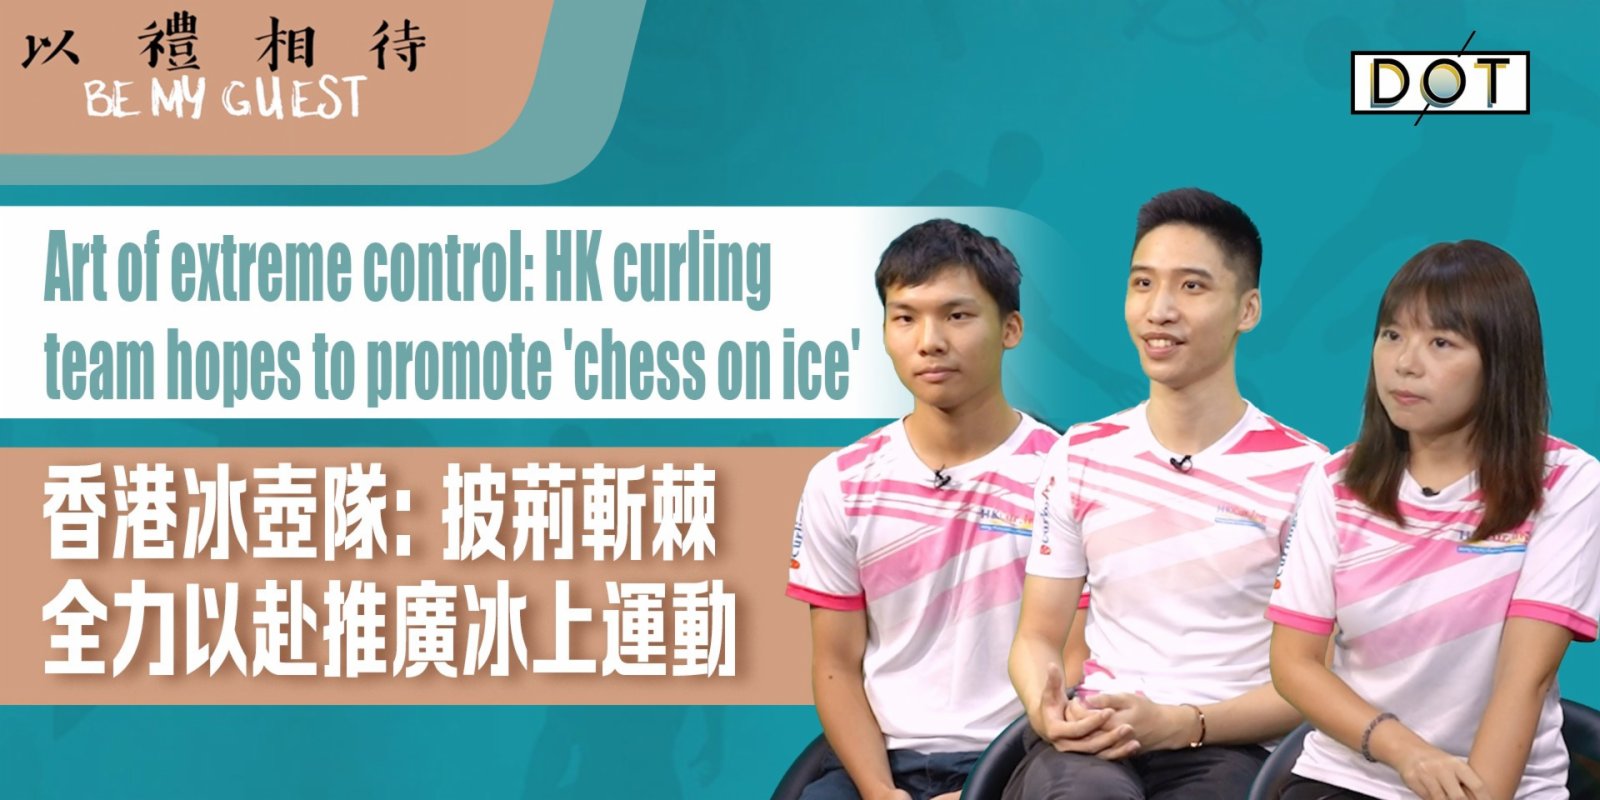 Be My Guest | Art of extreme control: HK curling team hopes to promote 'chess on ice'